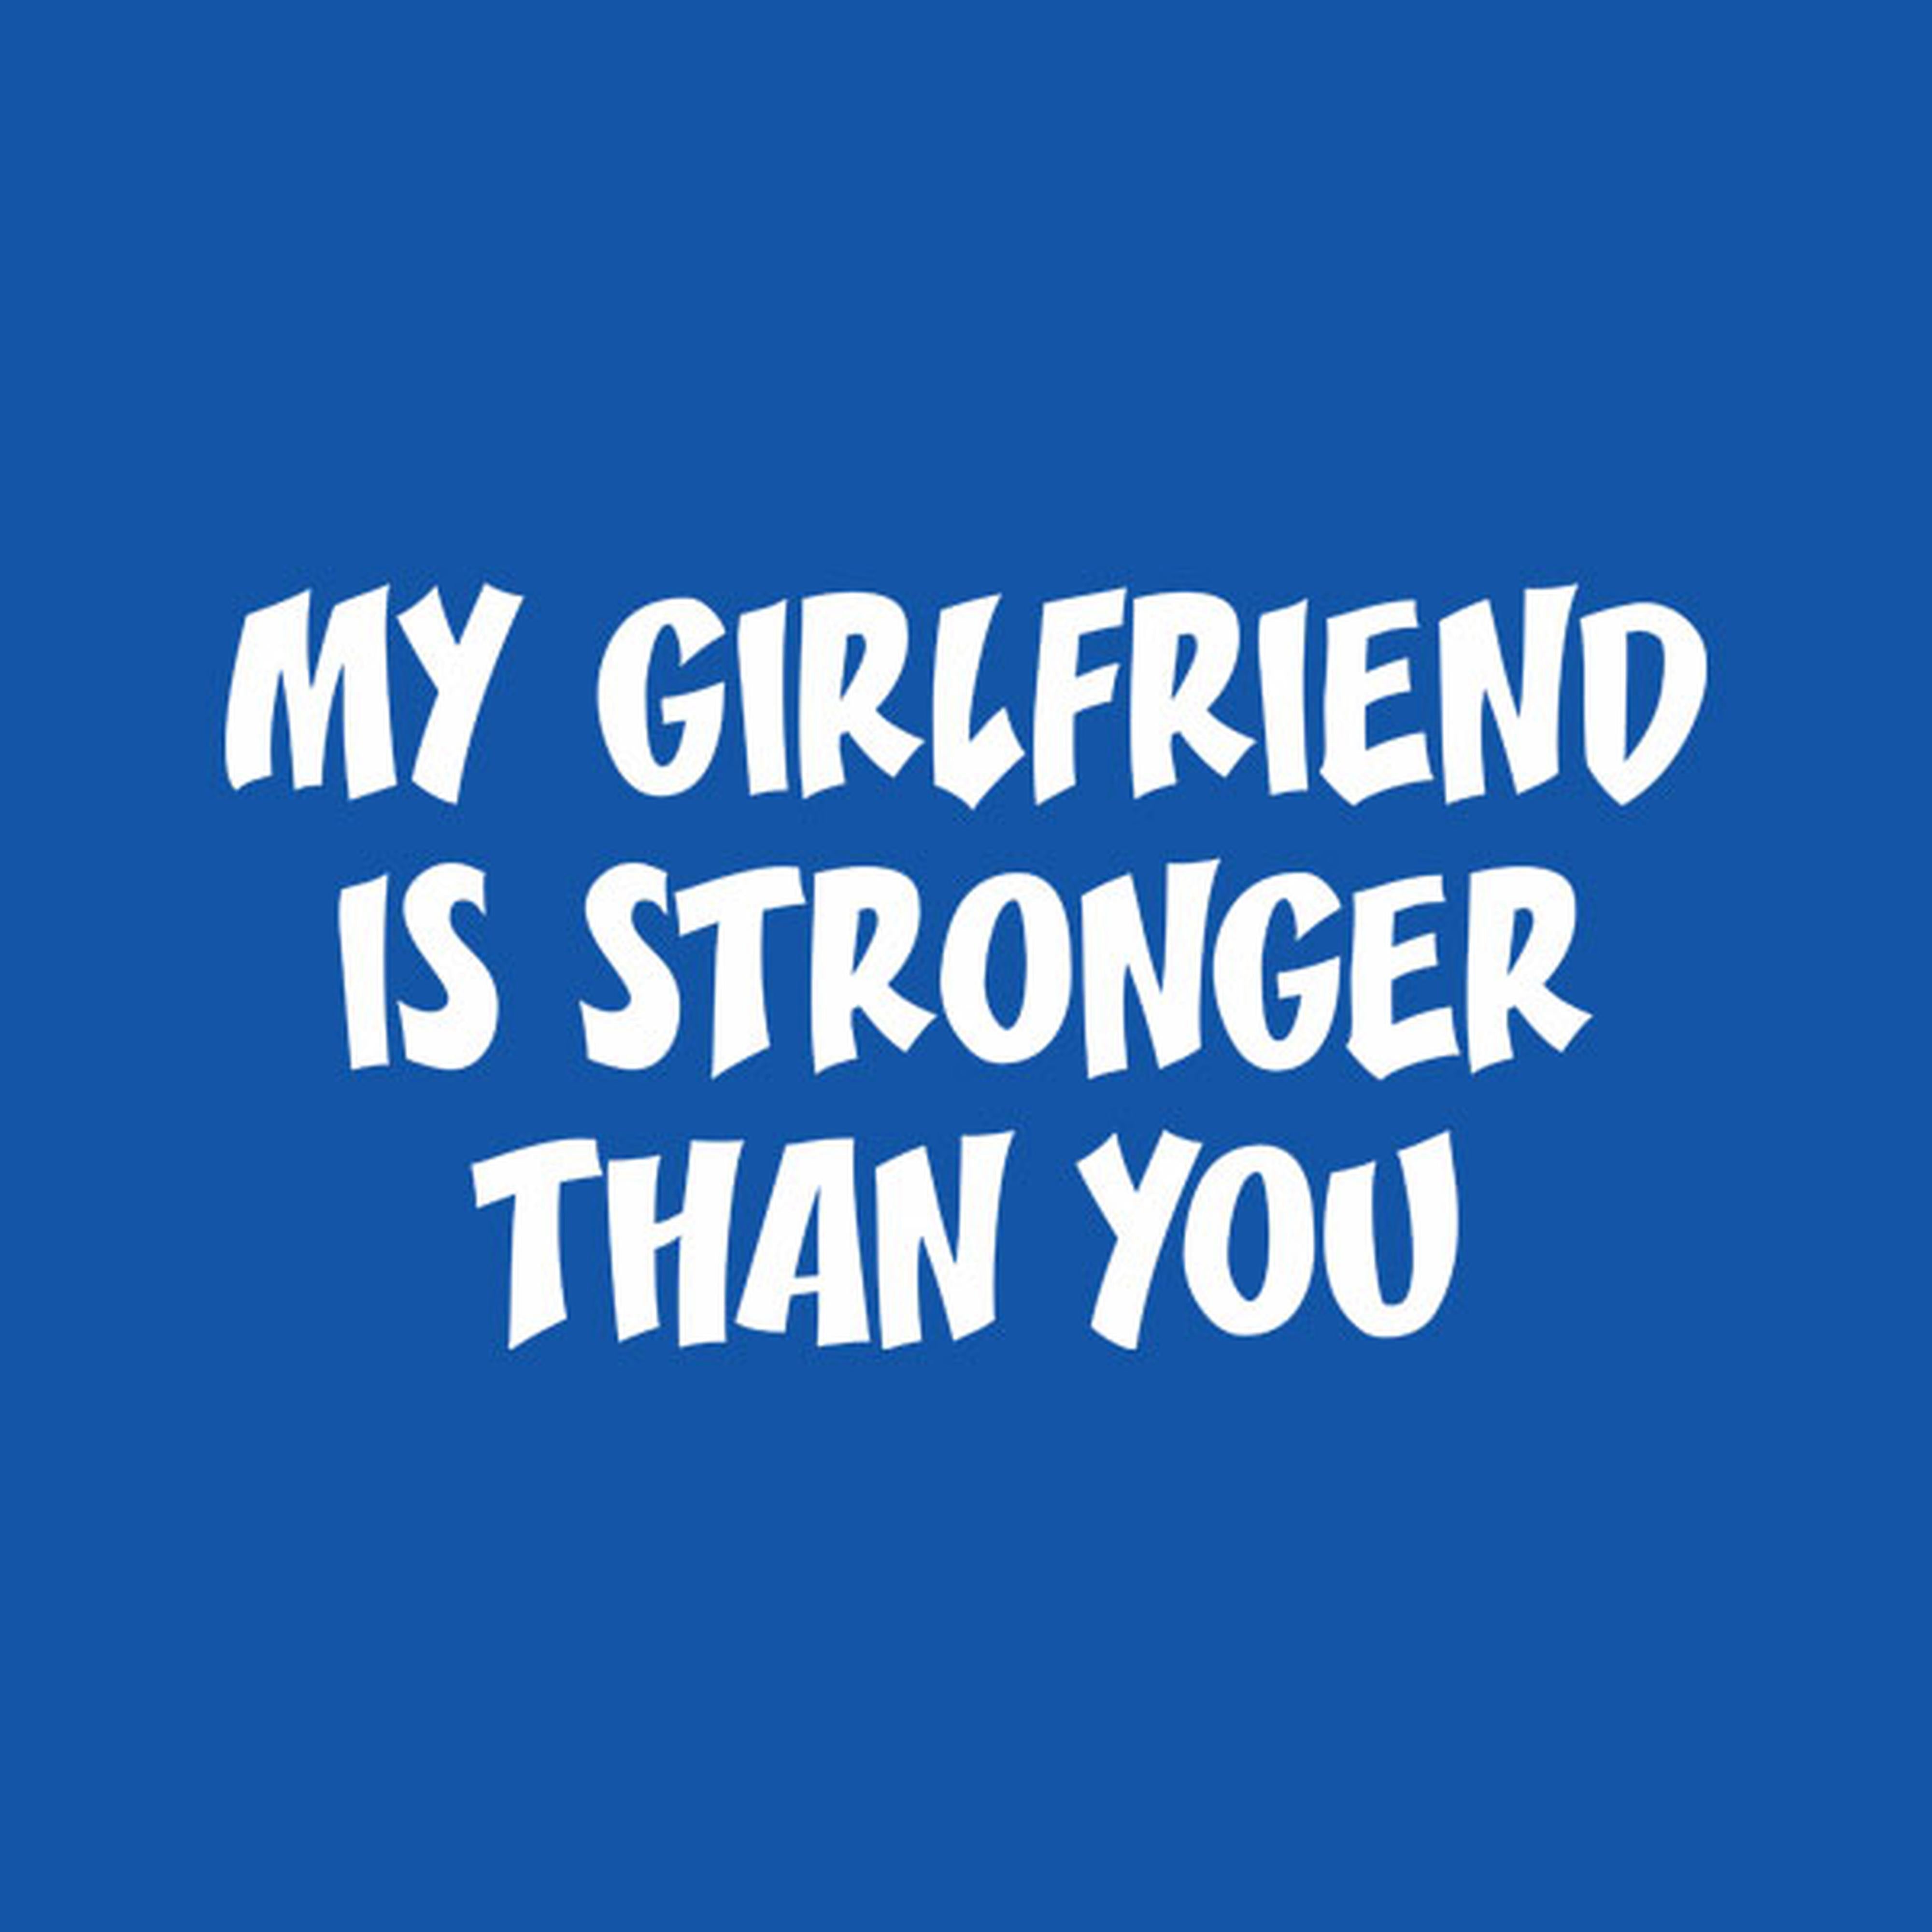 My girlfriend is stronger than you - T-shirt